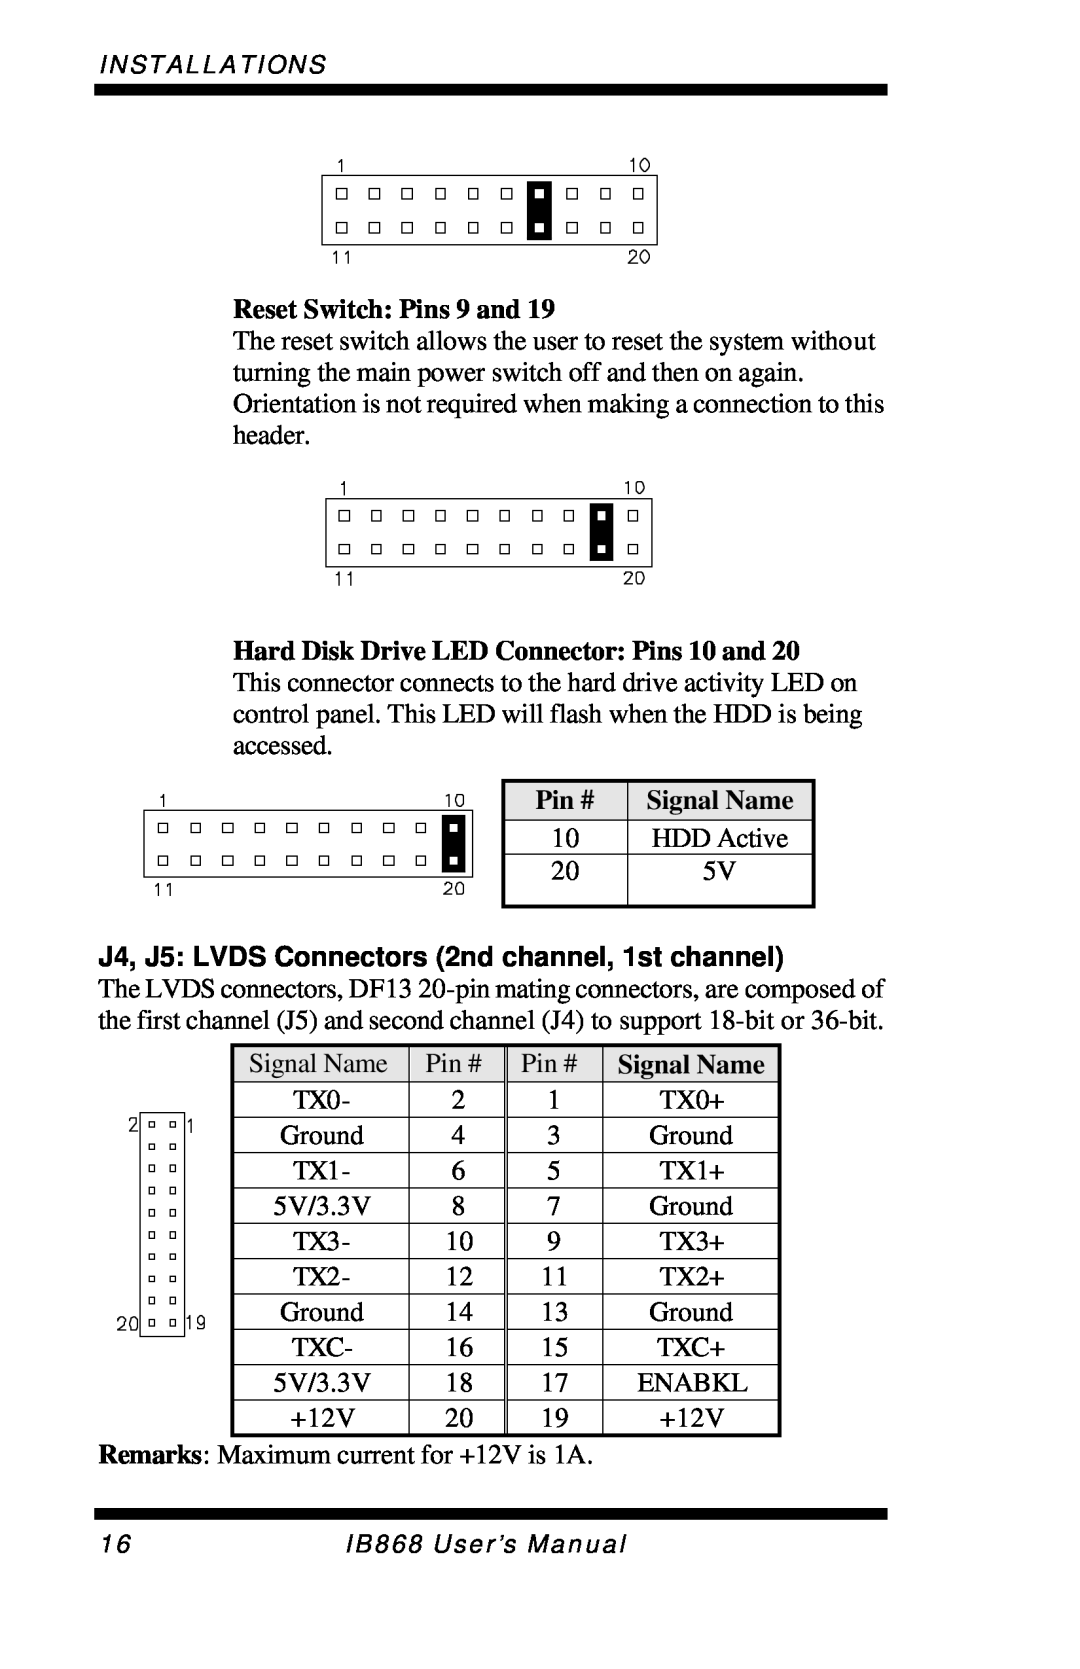 Intel IB868 user manual J4, J5: LVDS Connectors 2nd channel, 1st channel, Reset Switch: Pins 9 and, Pin #, Signal Name 